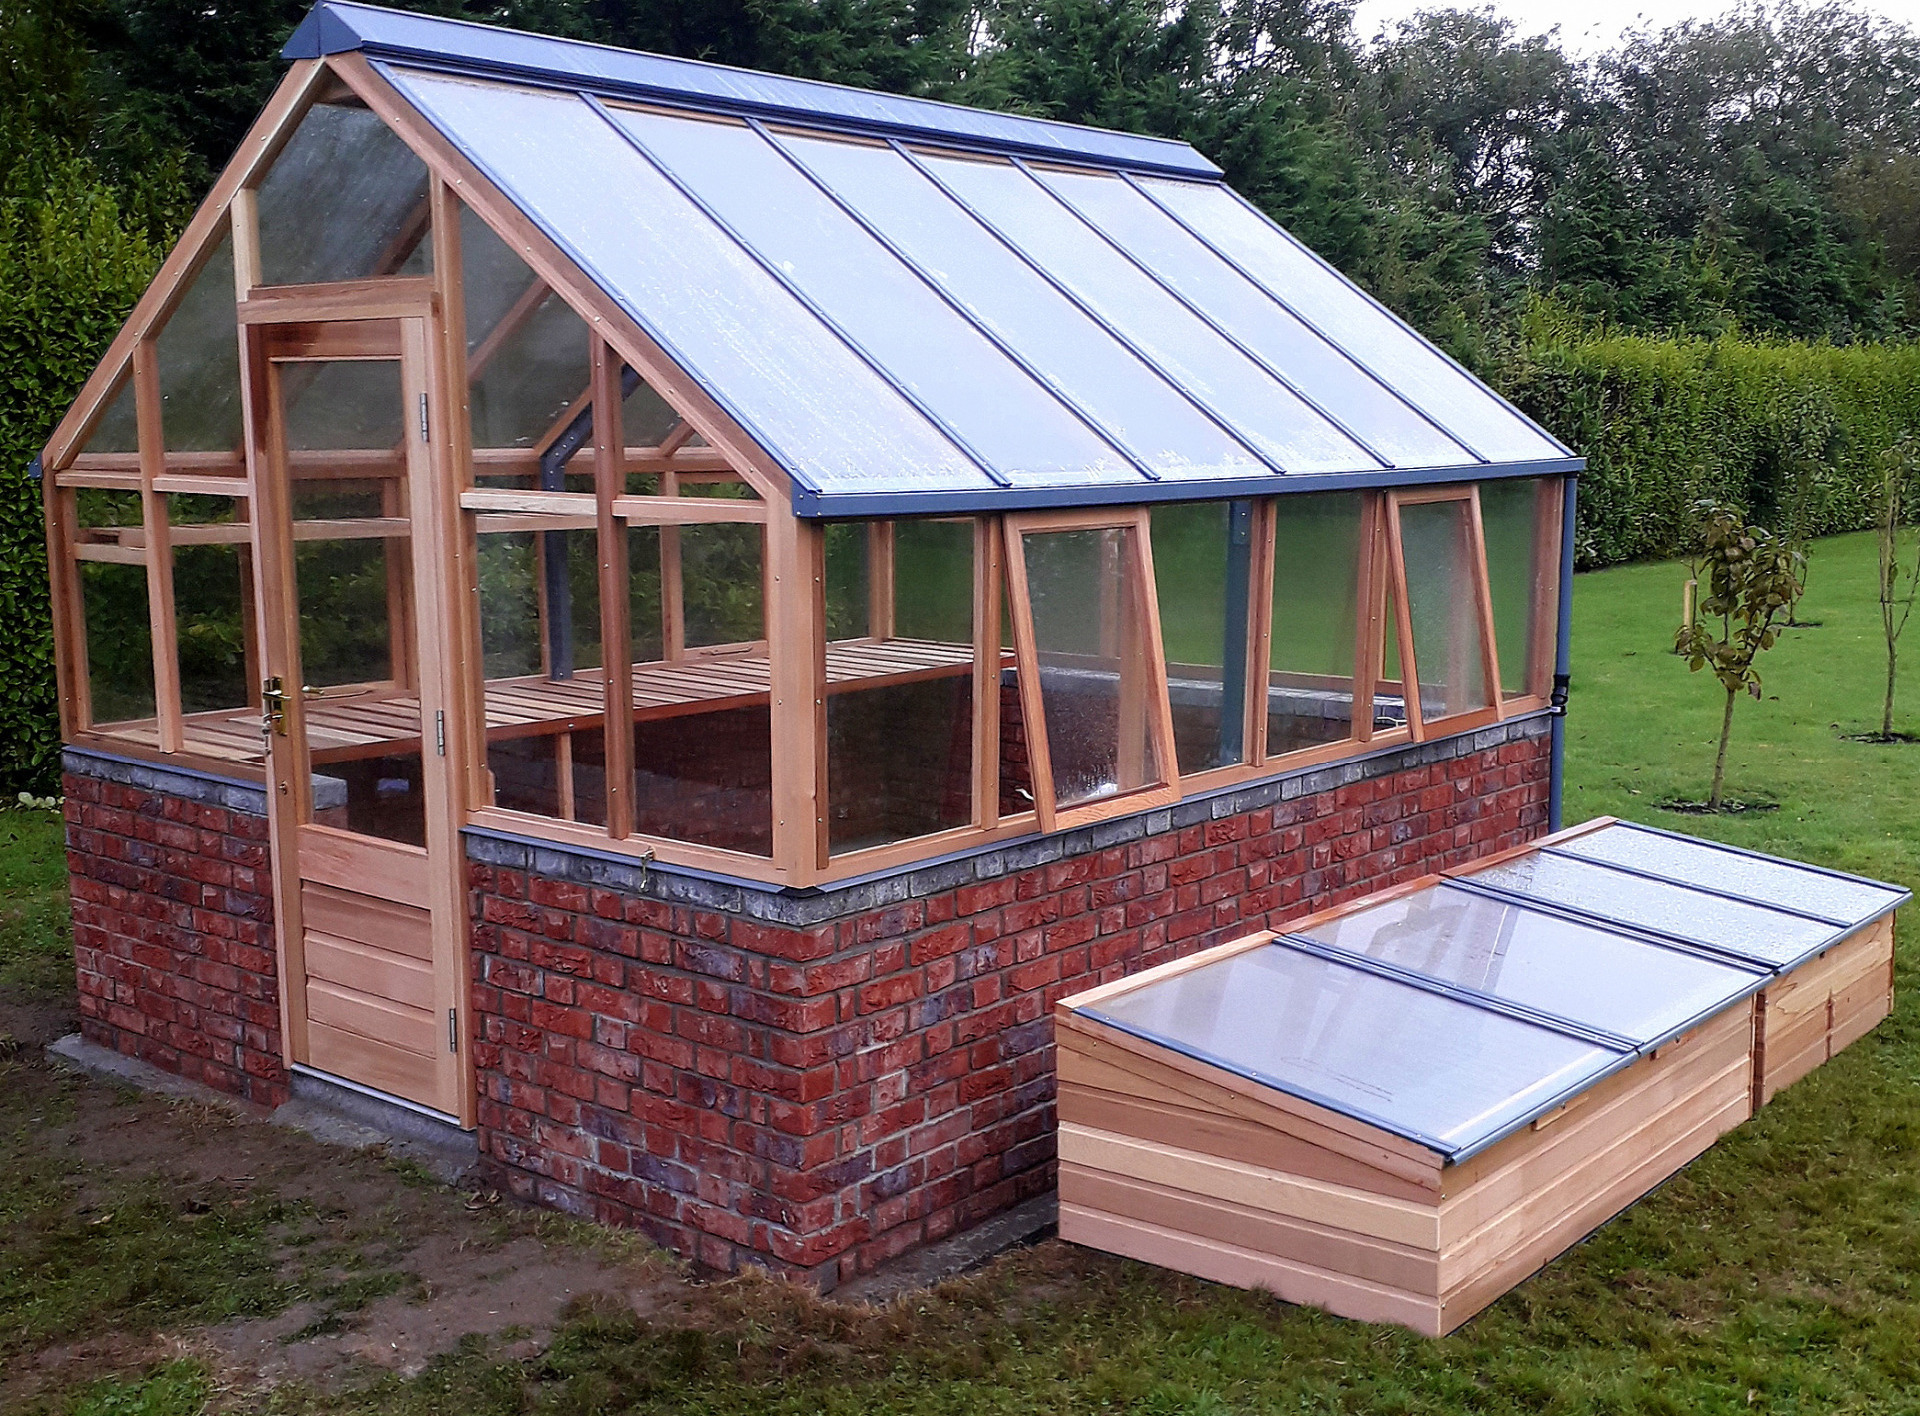 Gabriel Ash Classic Ten (10 x 12) Greenhouse in Wexford | the only timber greenhouses endorsed by the RHS | Owen Chubb  087-2306128